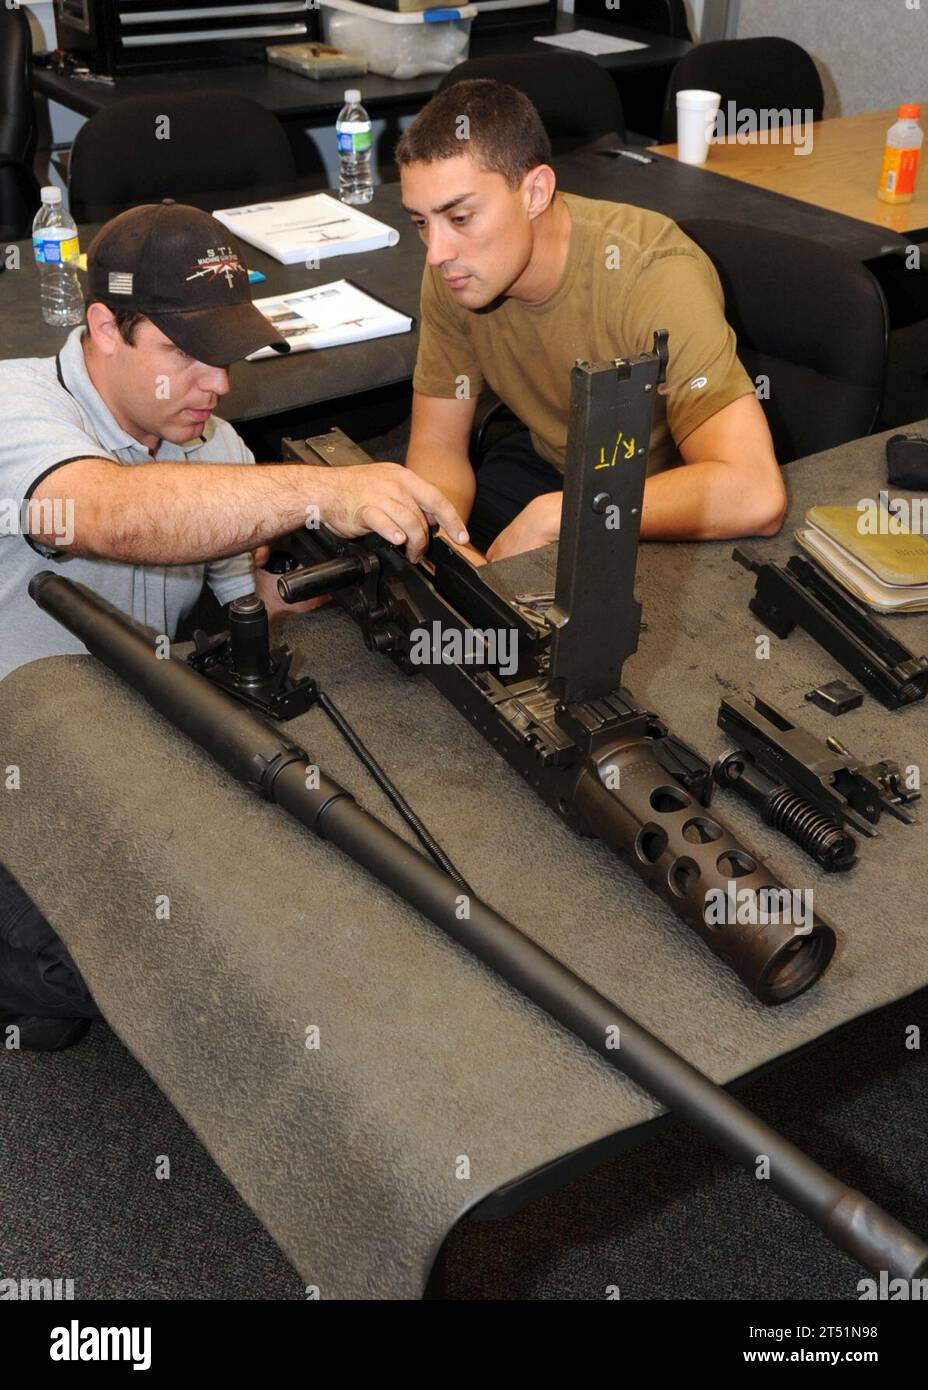 0907282651J-025 NORFOLK (July 28, 2009) A U.S. Navy special warfare combatant-craft crewman assigned to Special Boat Team (SBT) 20 is instructed on the components of a .50-caliber machine gun during a weapon operation and maintenance class. Members of SBT-20 are familiarizing themselves with weapons use and maintenance. Navy Stock Photo